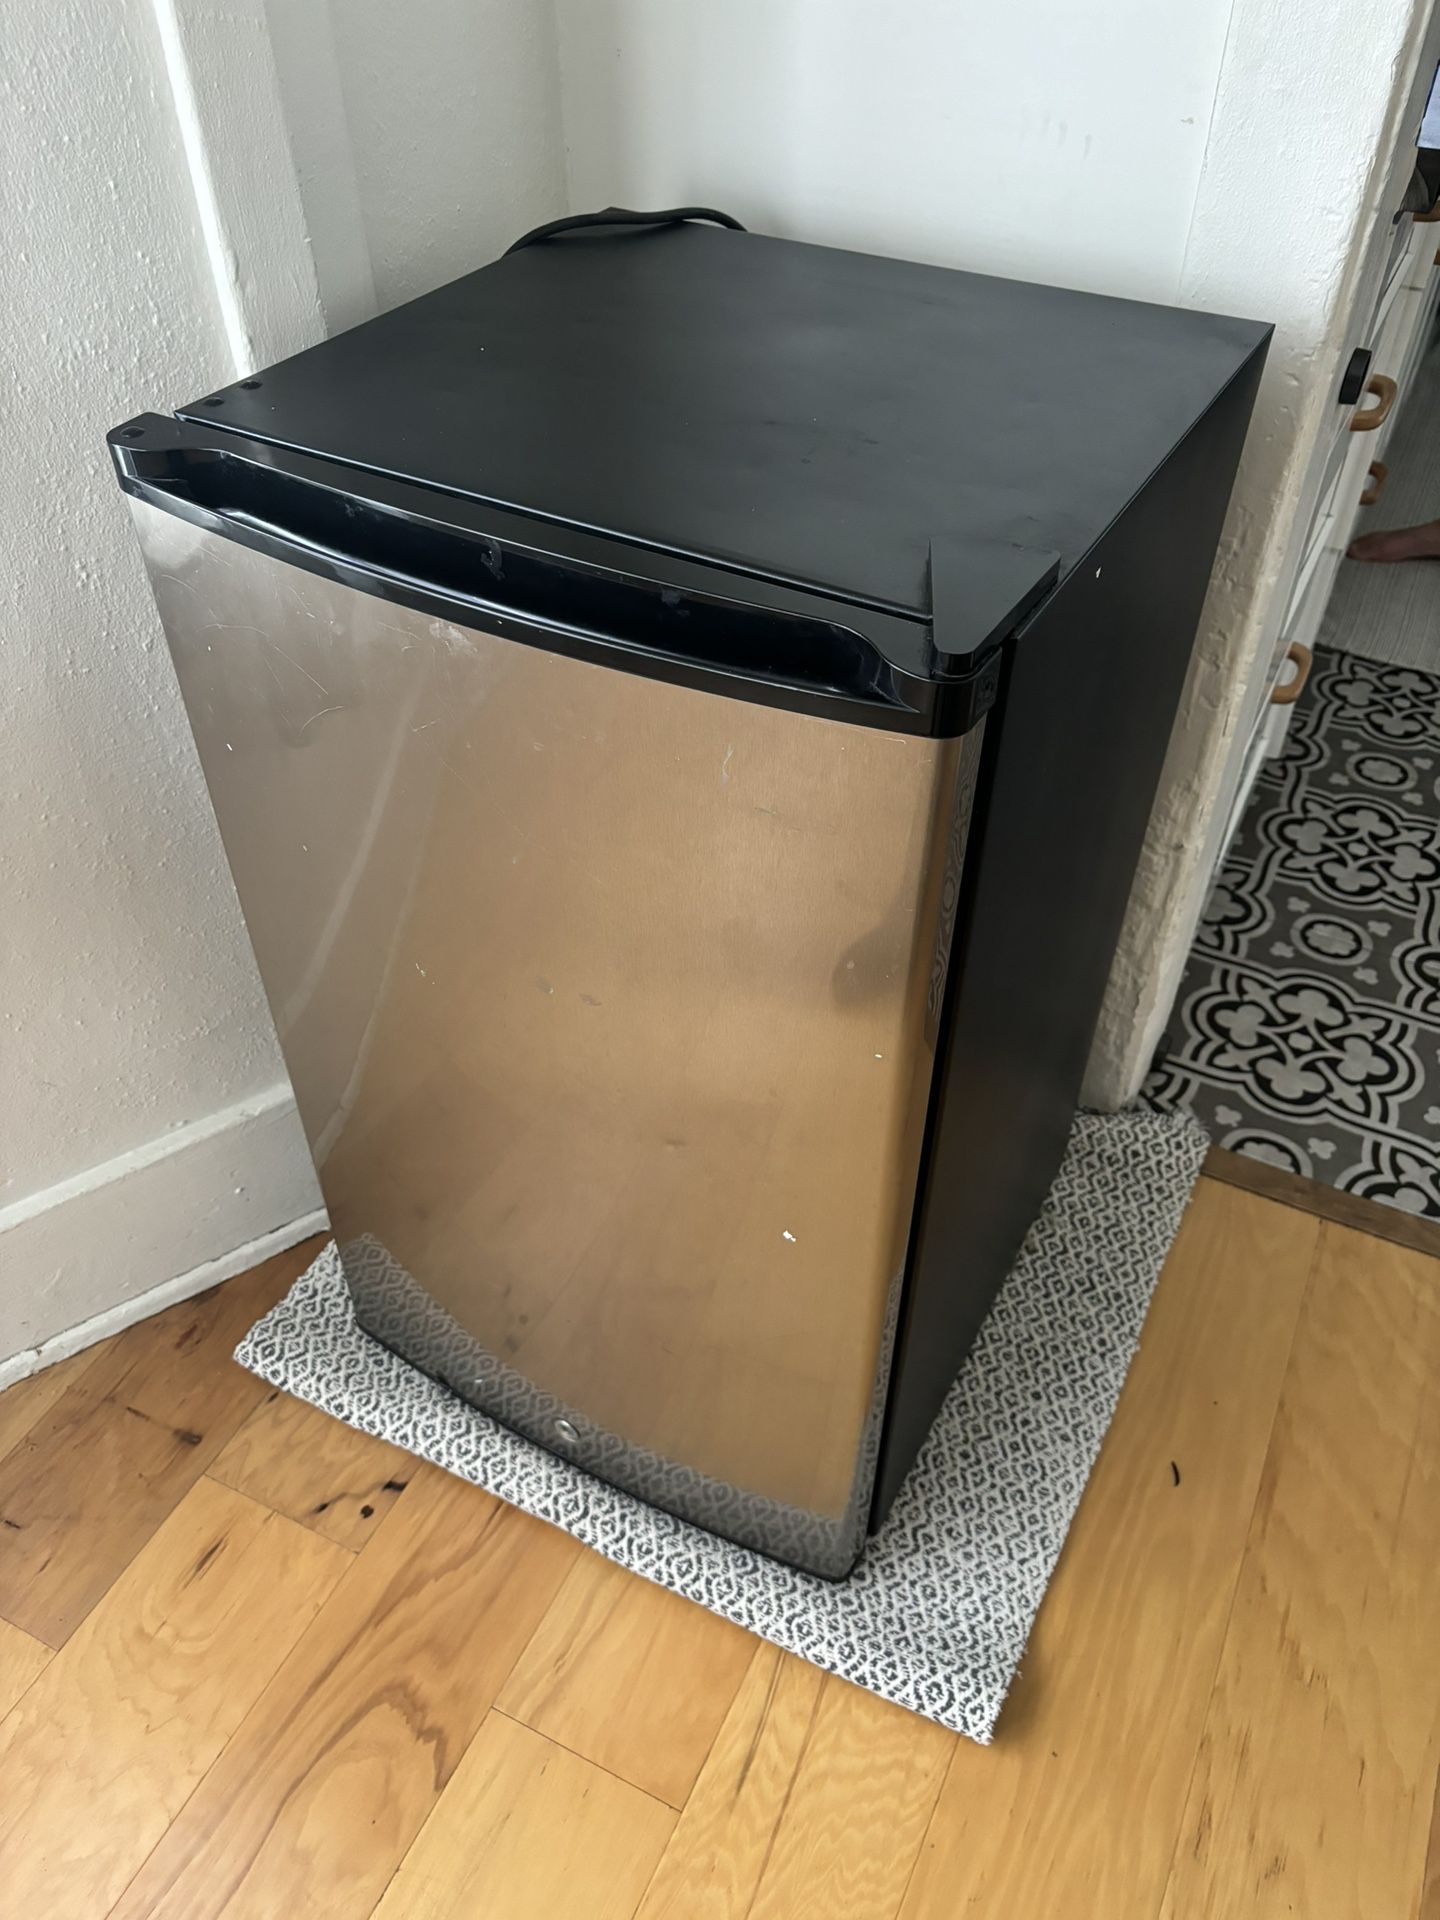 Small freezer in good condition